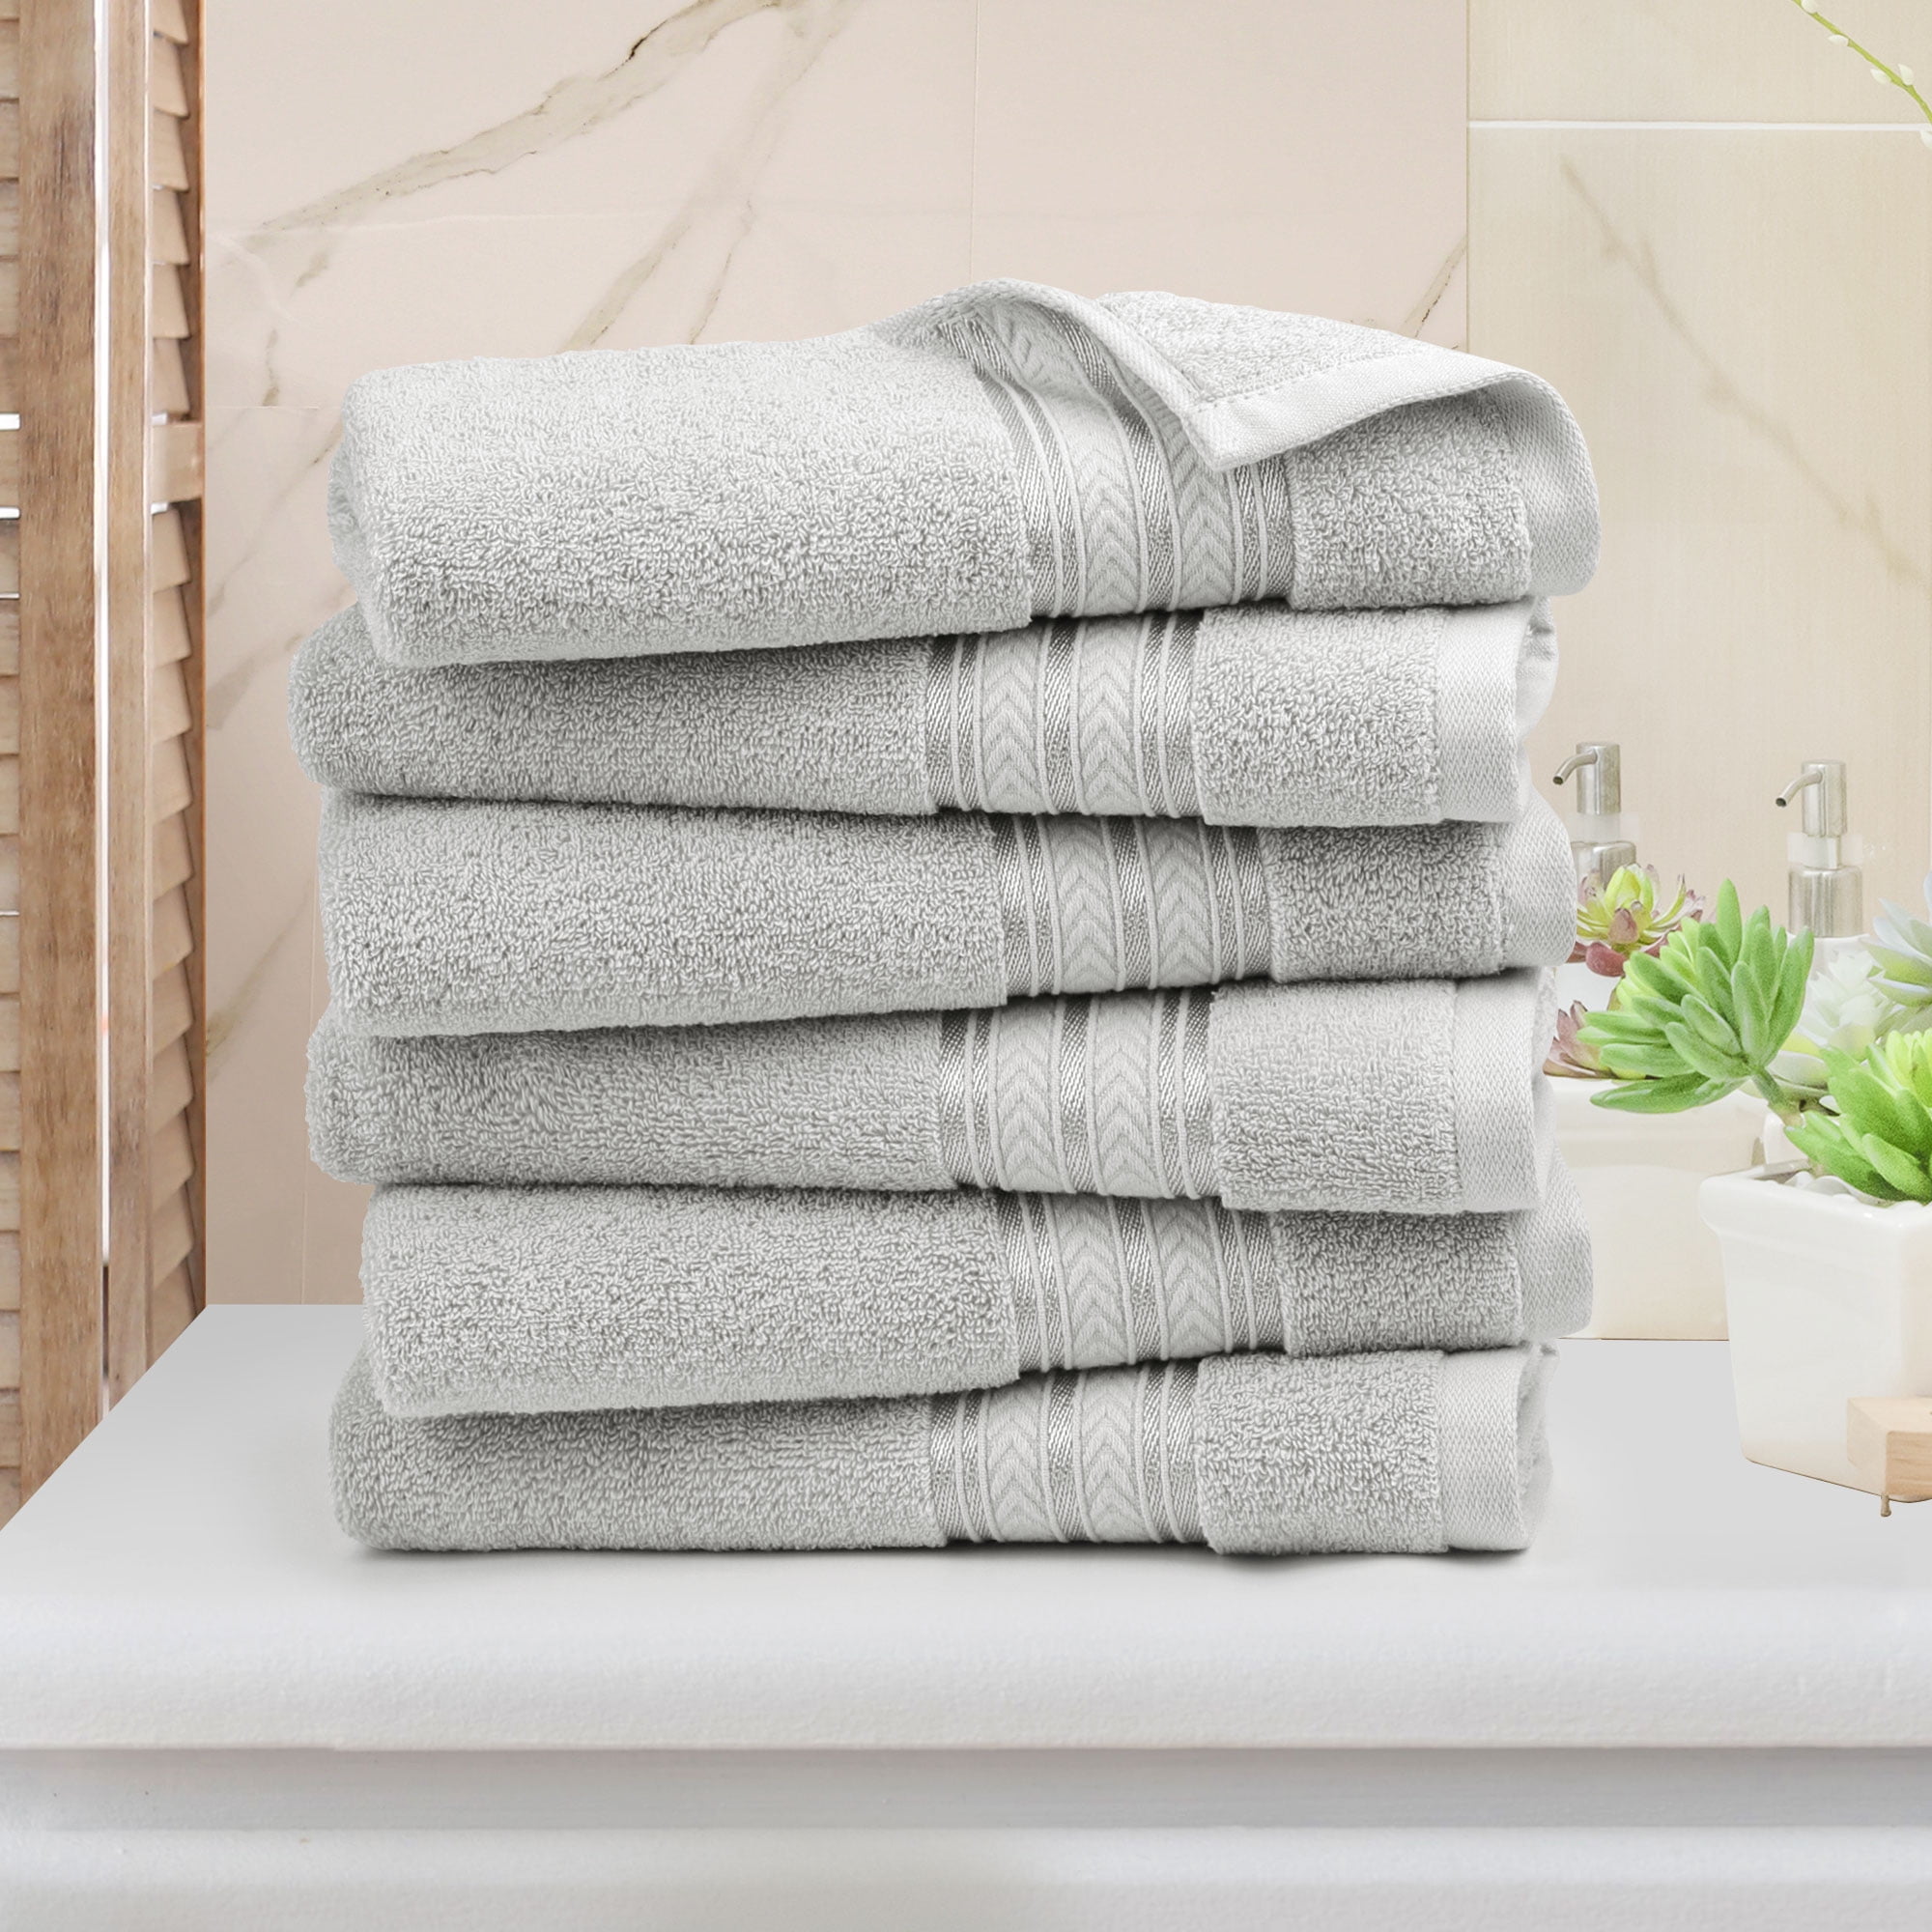 2/4 PCS 100% Cotton Bath Towels for Adults Children High Quality Waffle  Towels Absorbent Quick Dry Soft Home Bathroom Washcloth - AliExpress